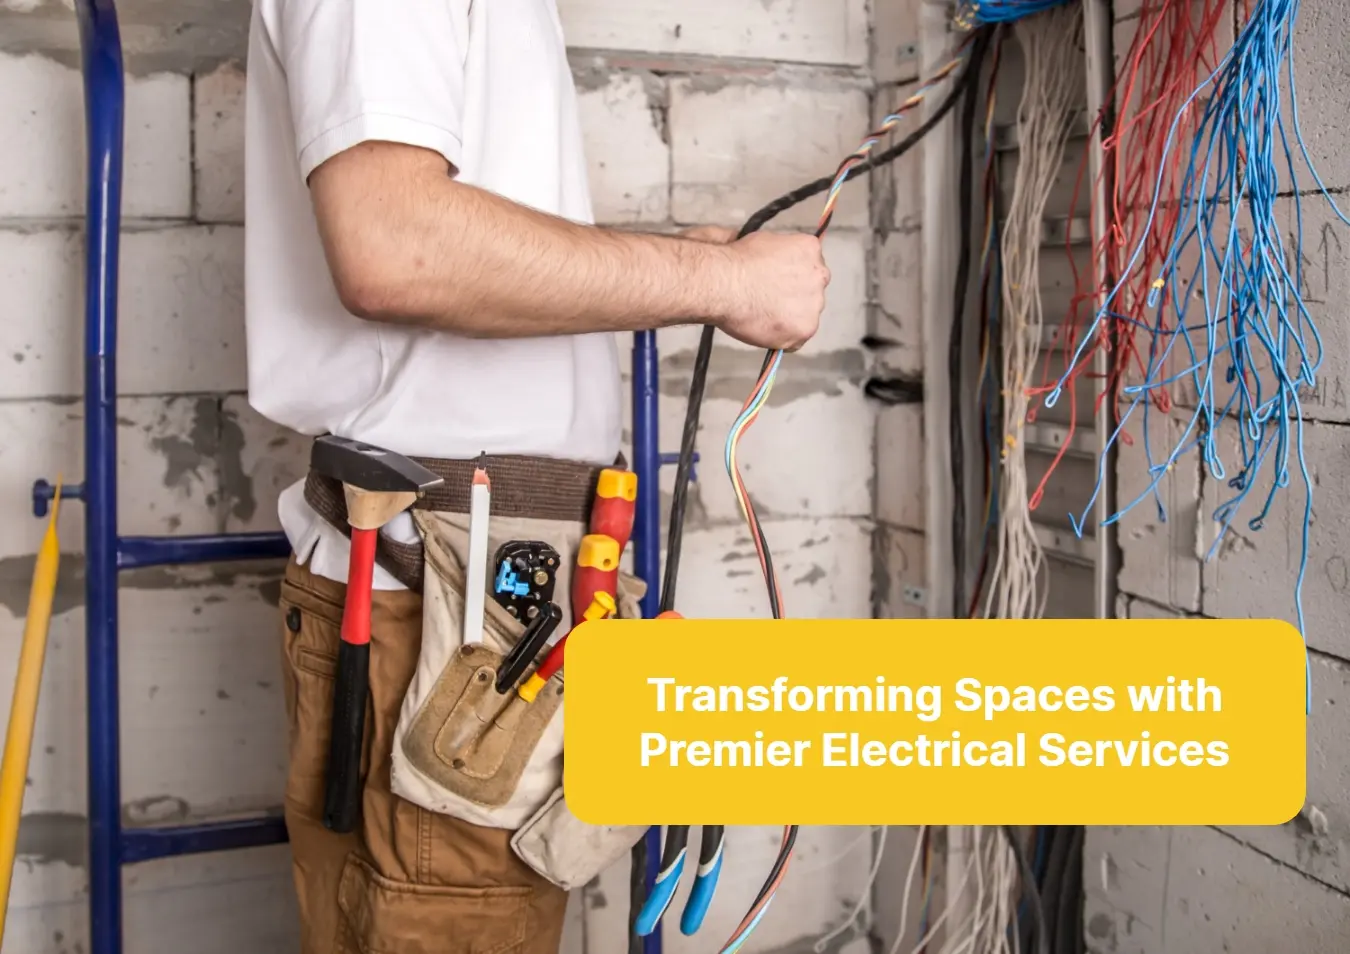 Transforming Spaces with Premier Electricals